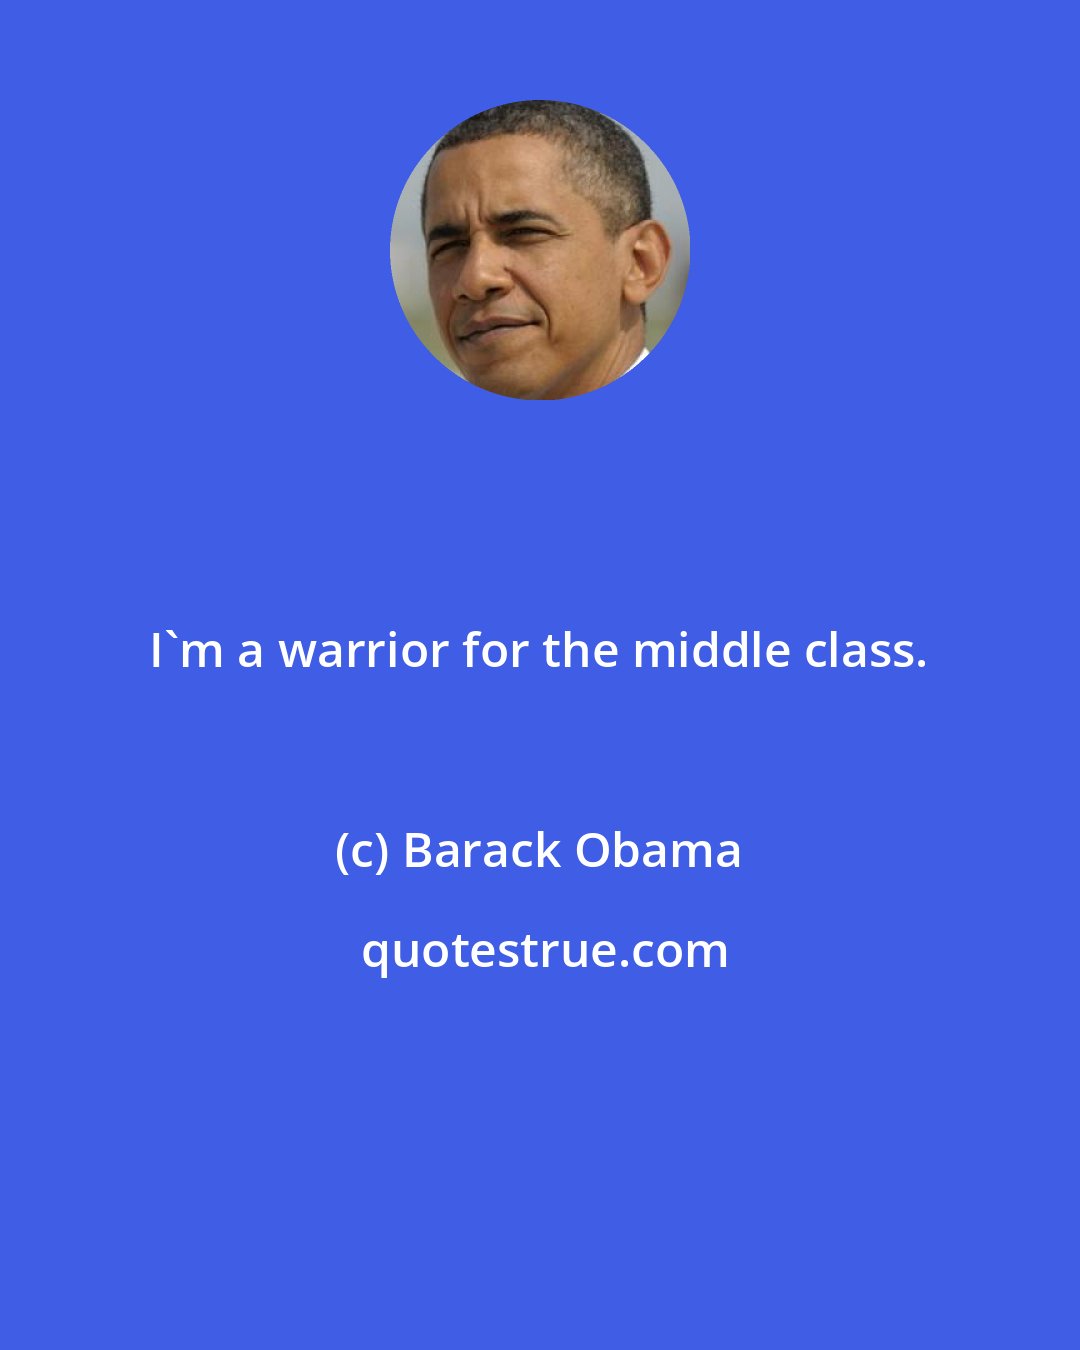 Barack Obama: I'm a warrior for the middle class.